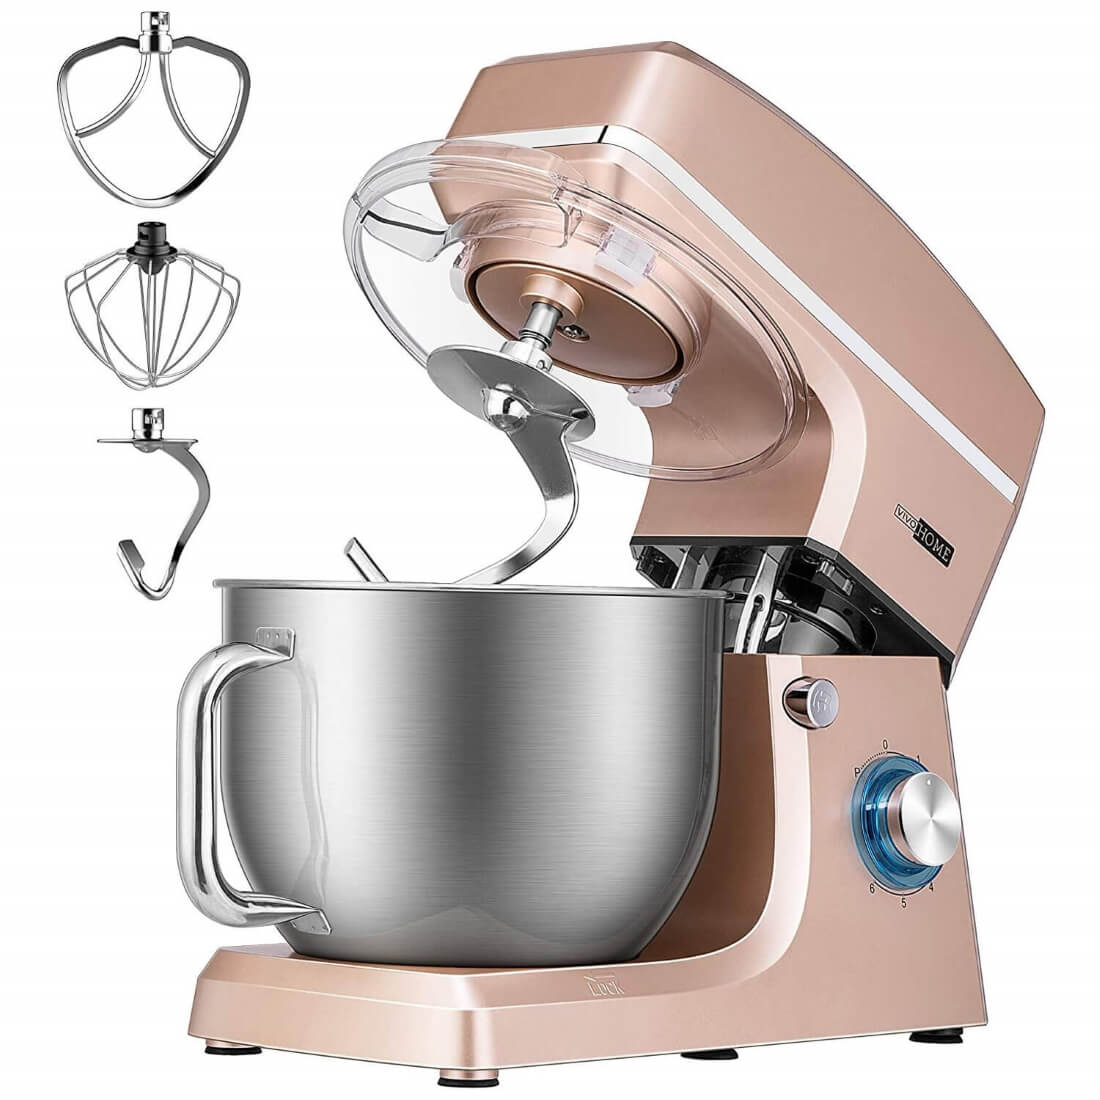 VIVOHOME 7.5 Quart Stand Mixer, 660W 6-Speed Tilt-Head Kitchen Electric Food Mixer with Beater, Dough Hook and Wire Whip, Champagne